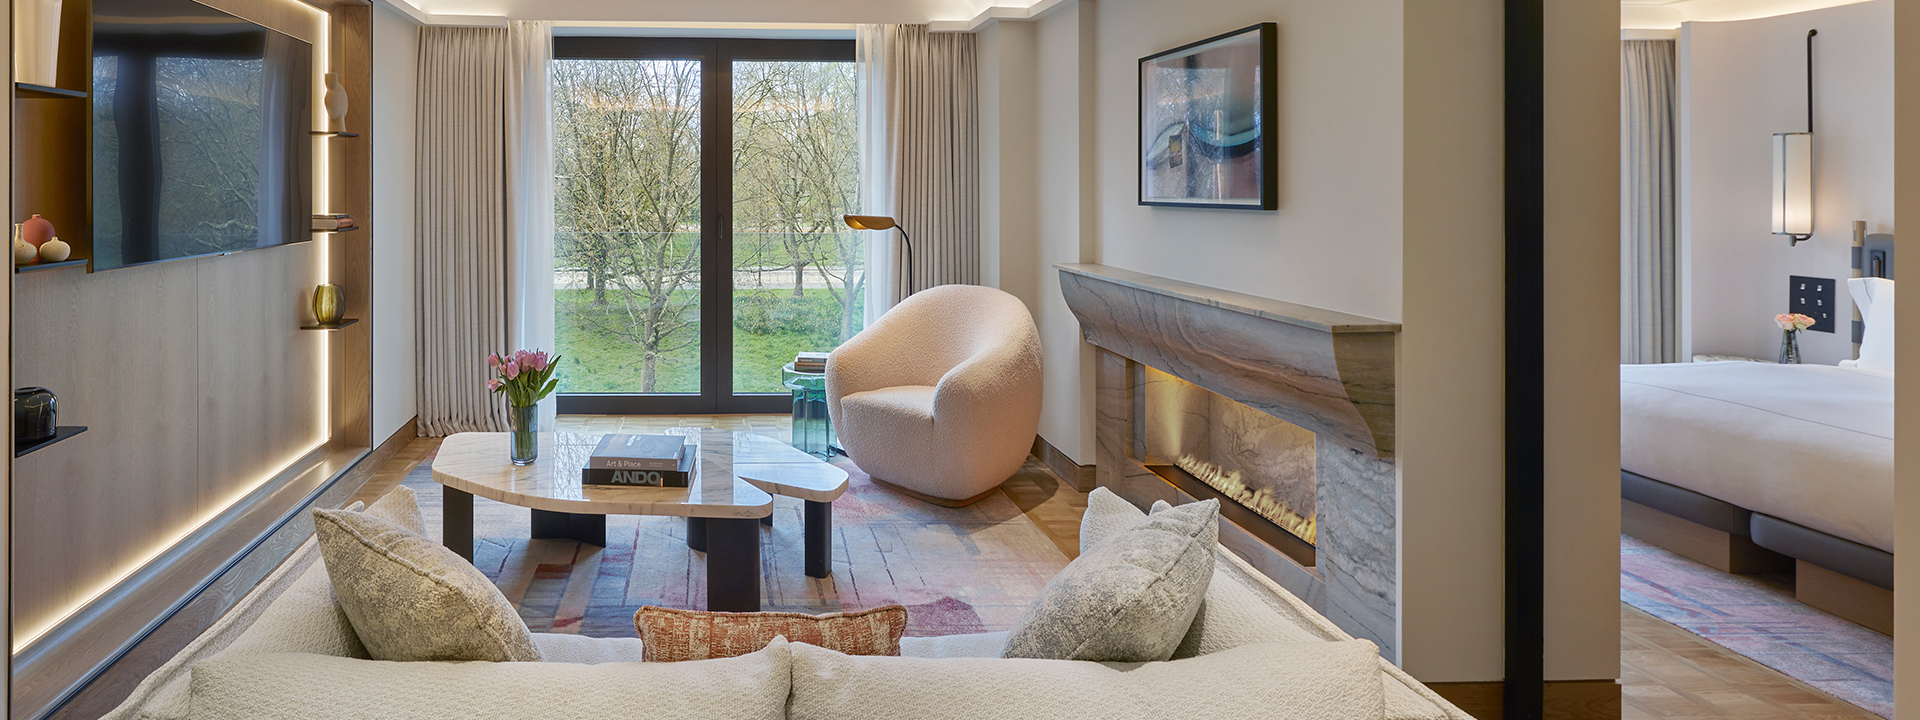 Park Suite at The Berkeley - View of the lounge with sofa, armchair and coffee table, with tv on the left side and bedroom on the right side and window with view onto Hyde Park in the background.